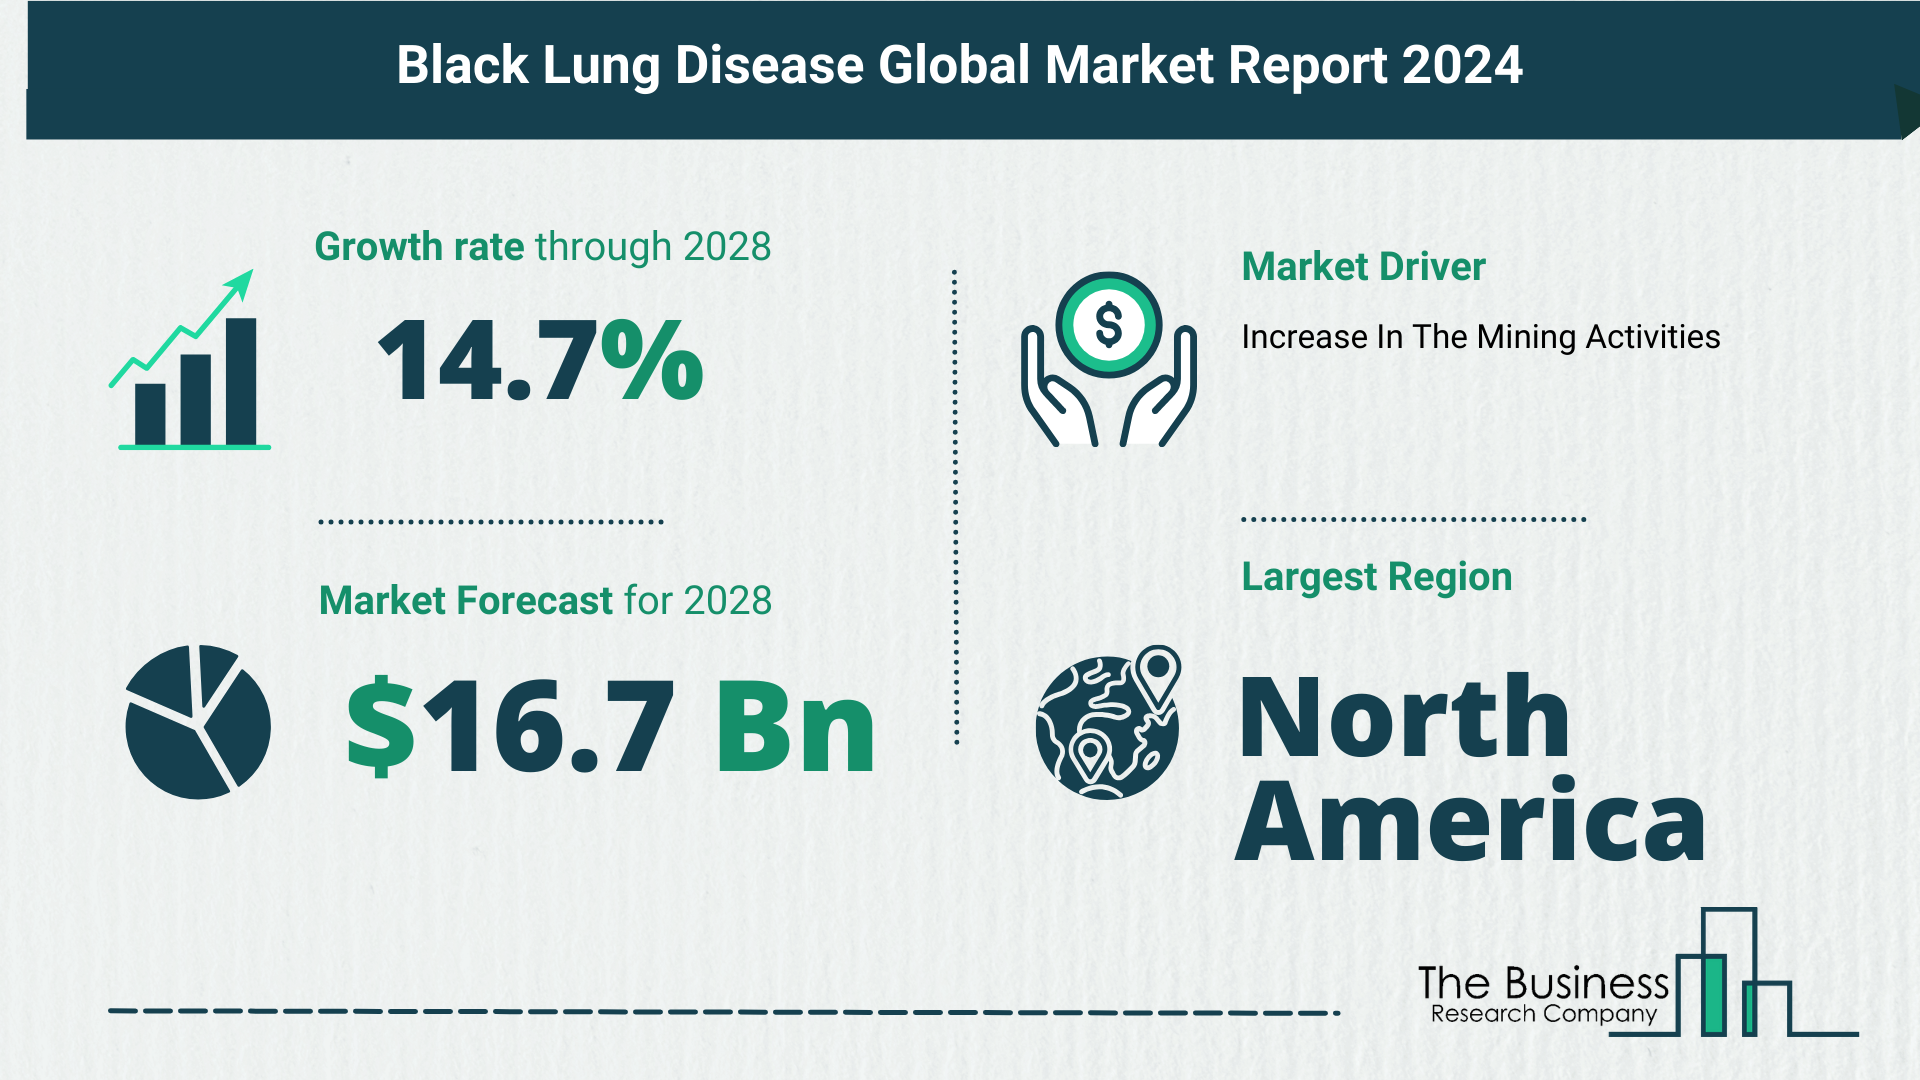 Understand How The Black Lung Disease Market Is Poised To Grow Through 2024-2033